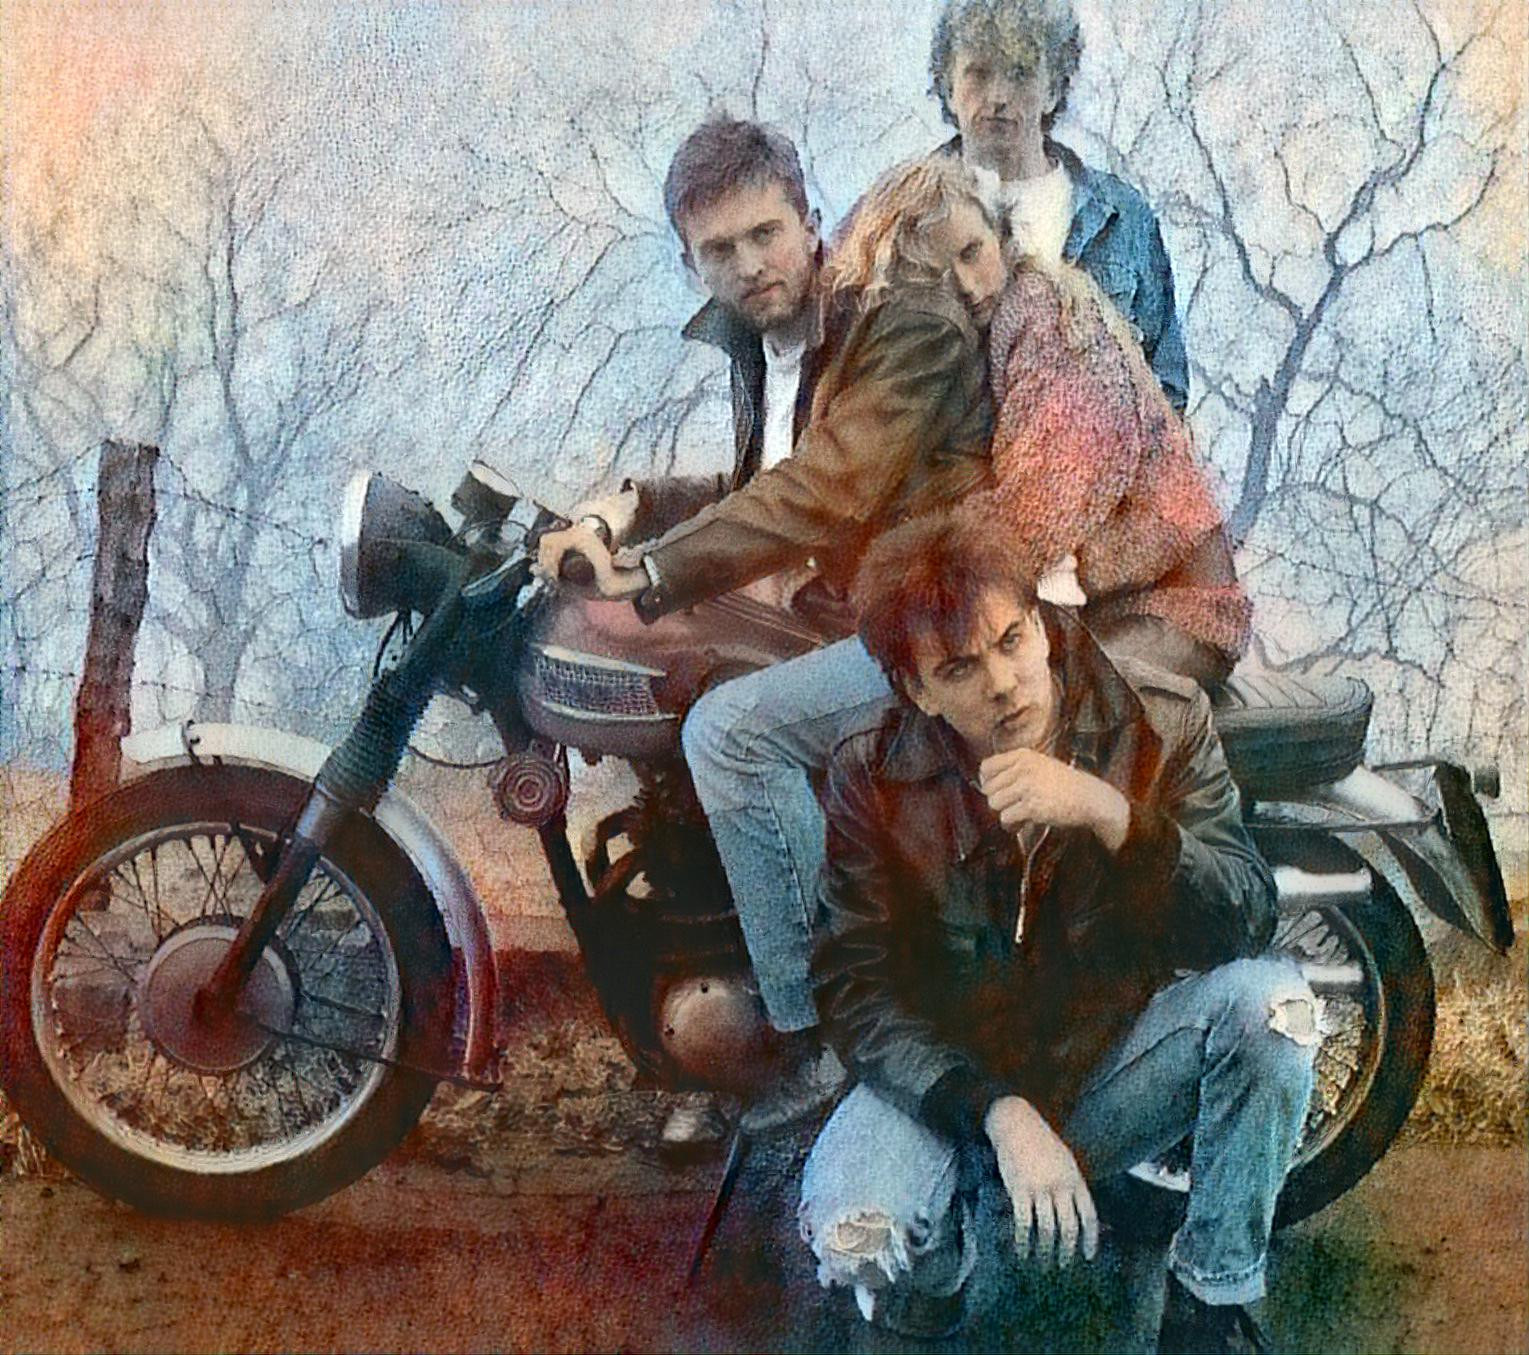 Prefab Sprout waiting for Steve McQueen